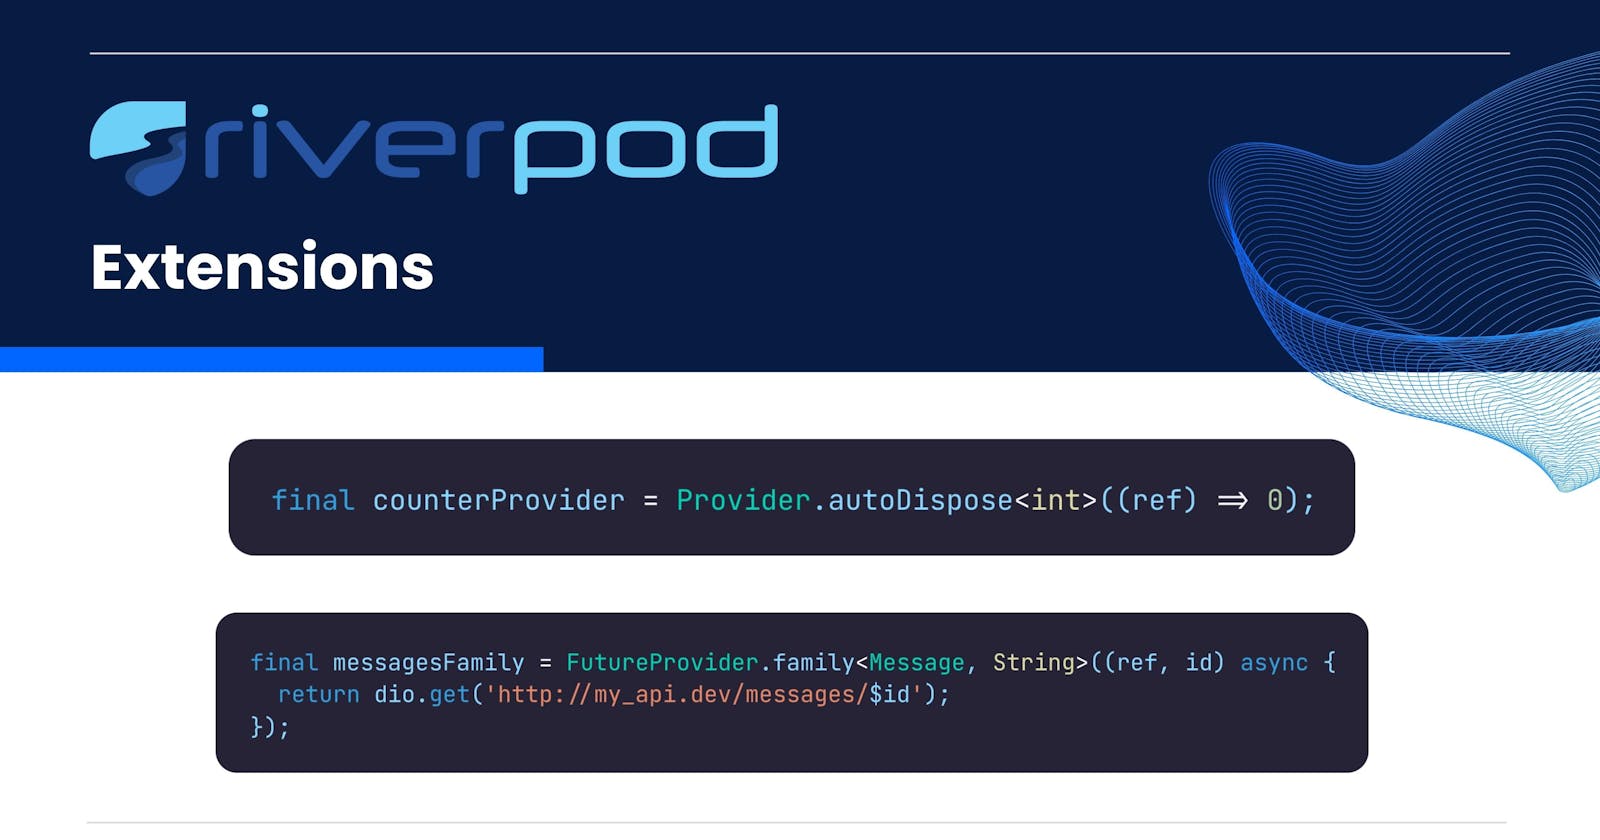 Why Choose Riverpod? - Riverpod Extensions